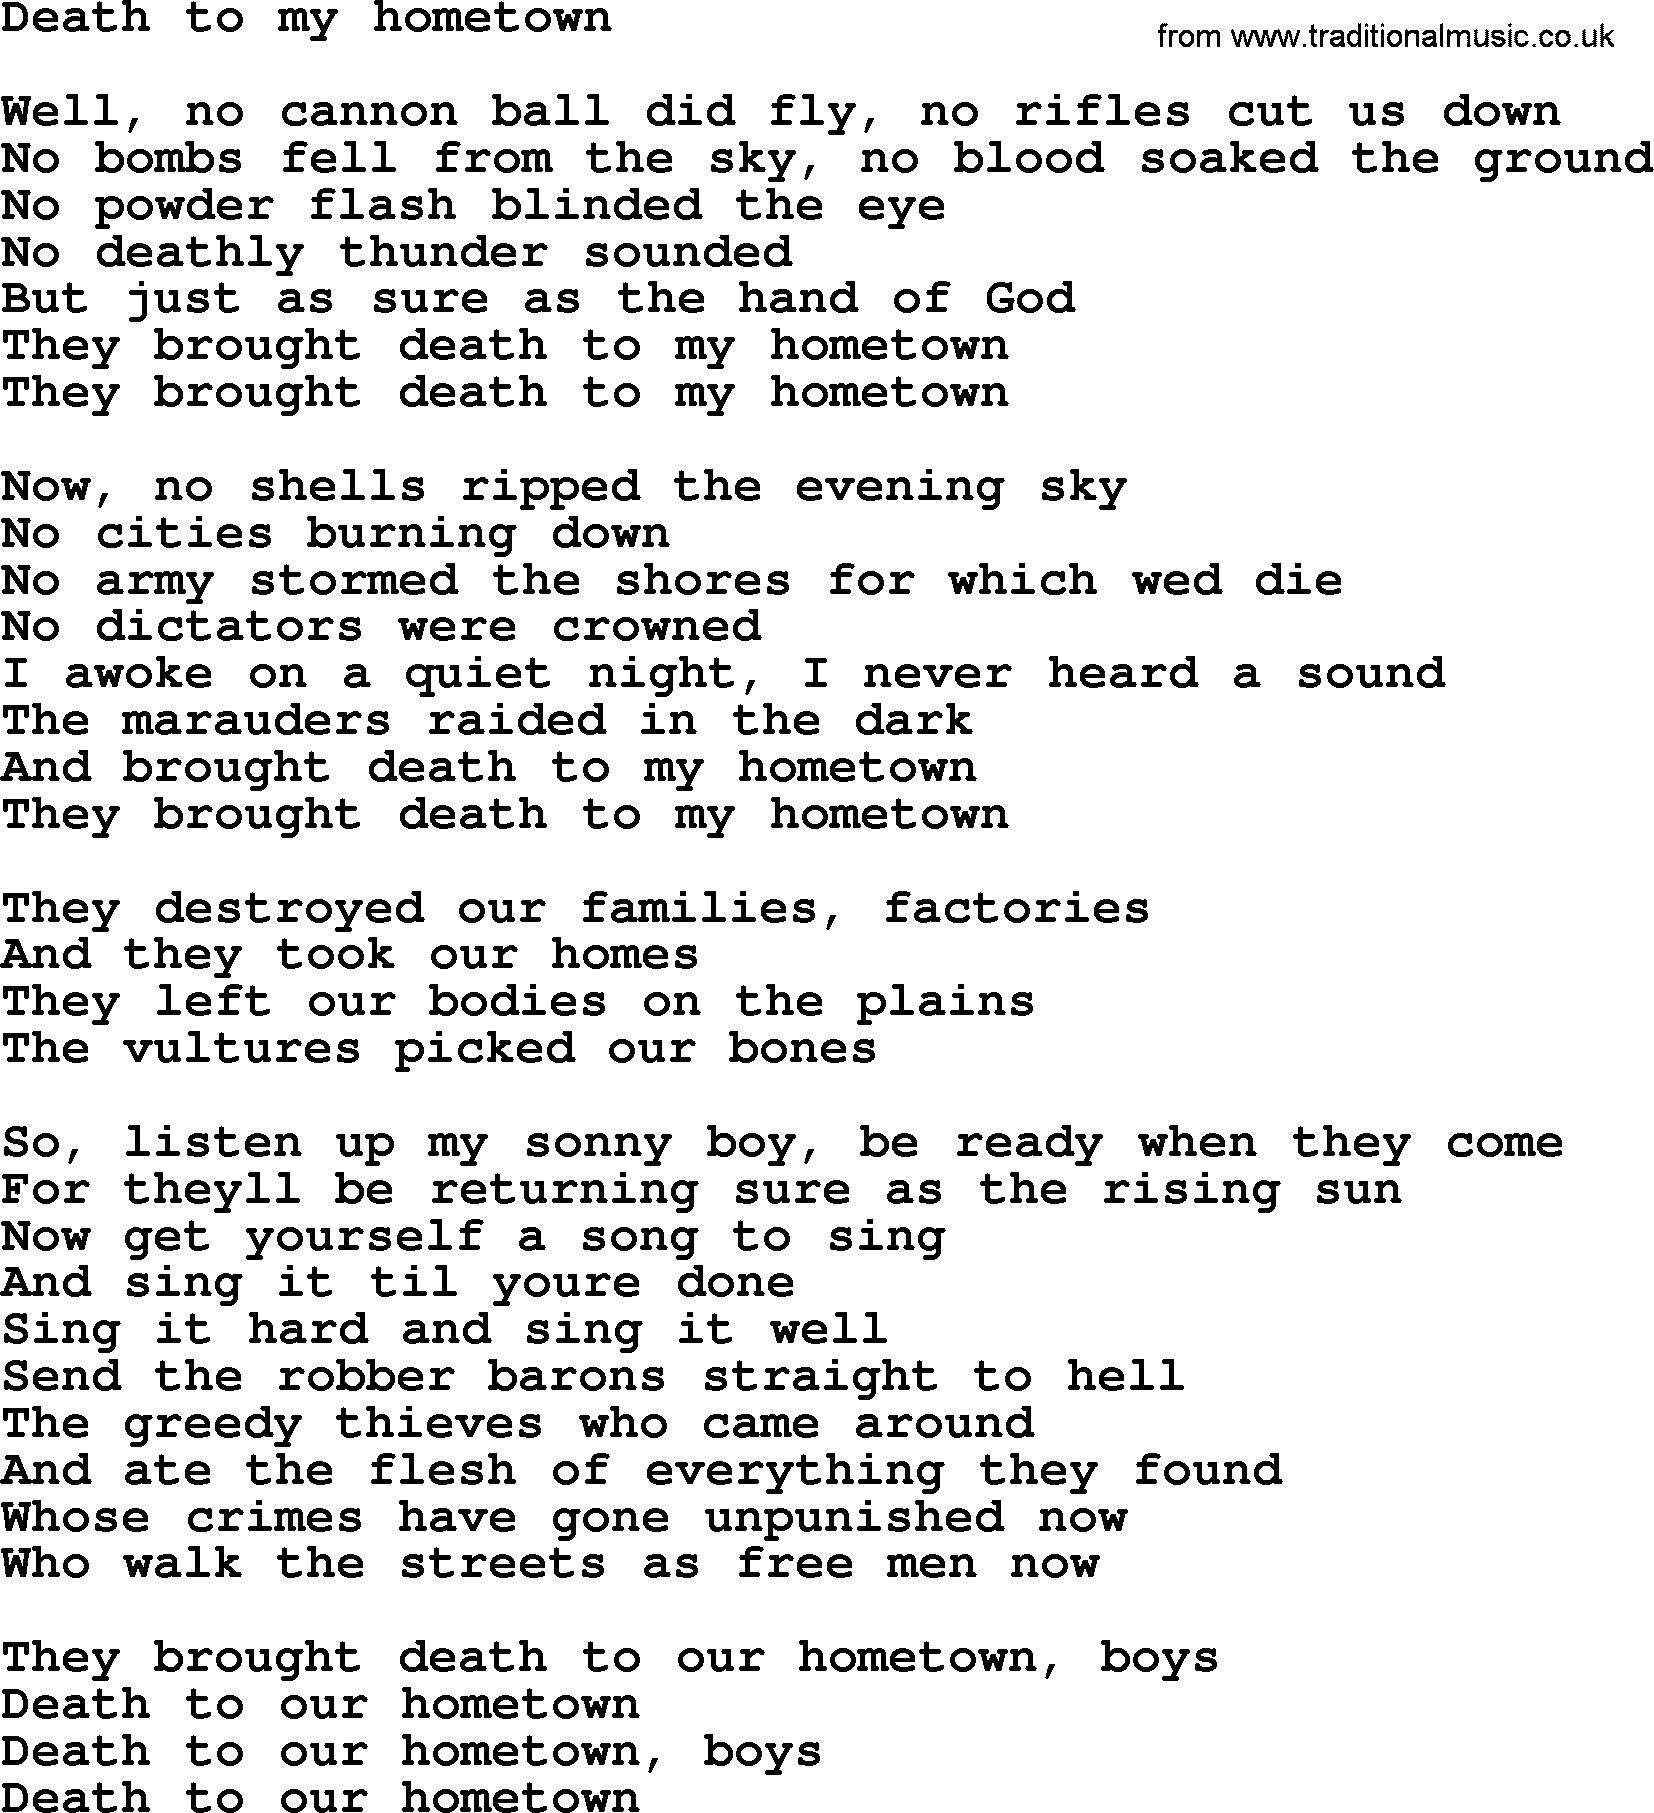 Bruce Springsteen song: Death To My Hometown lyrics